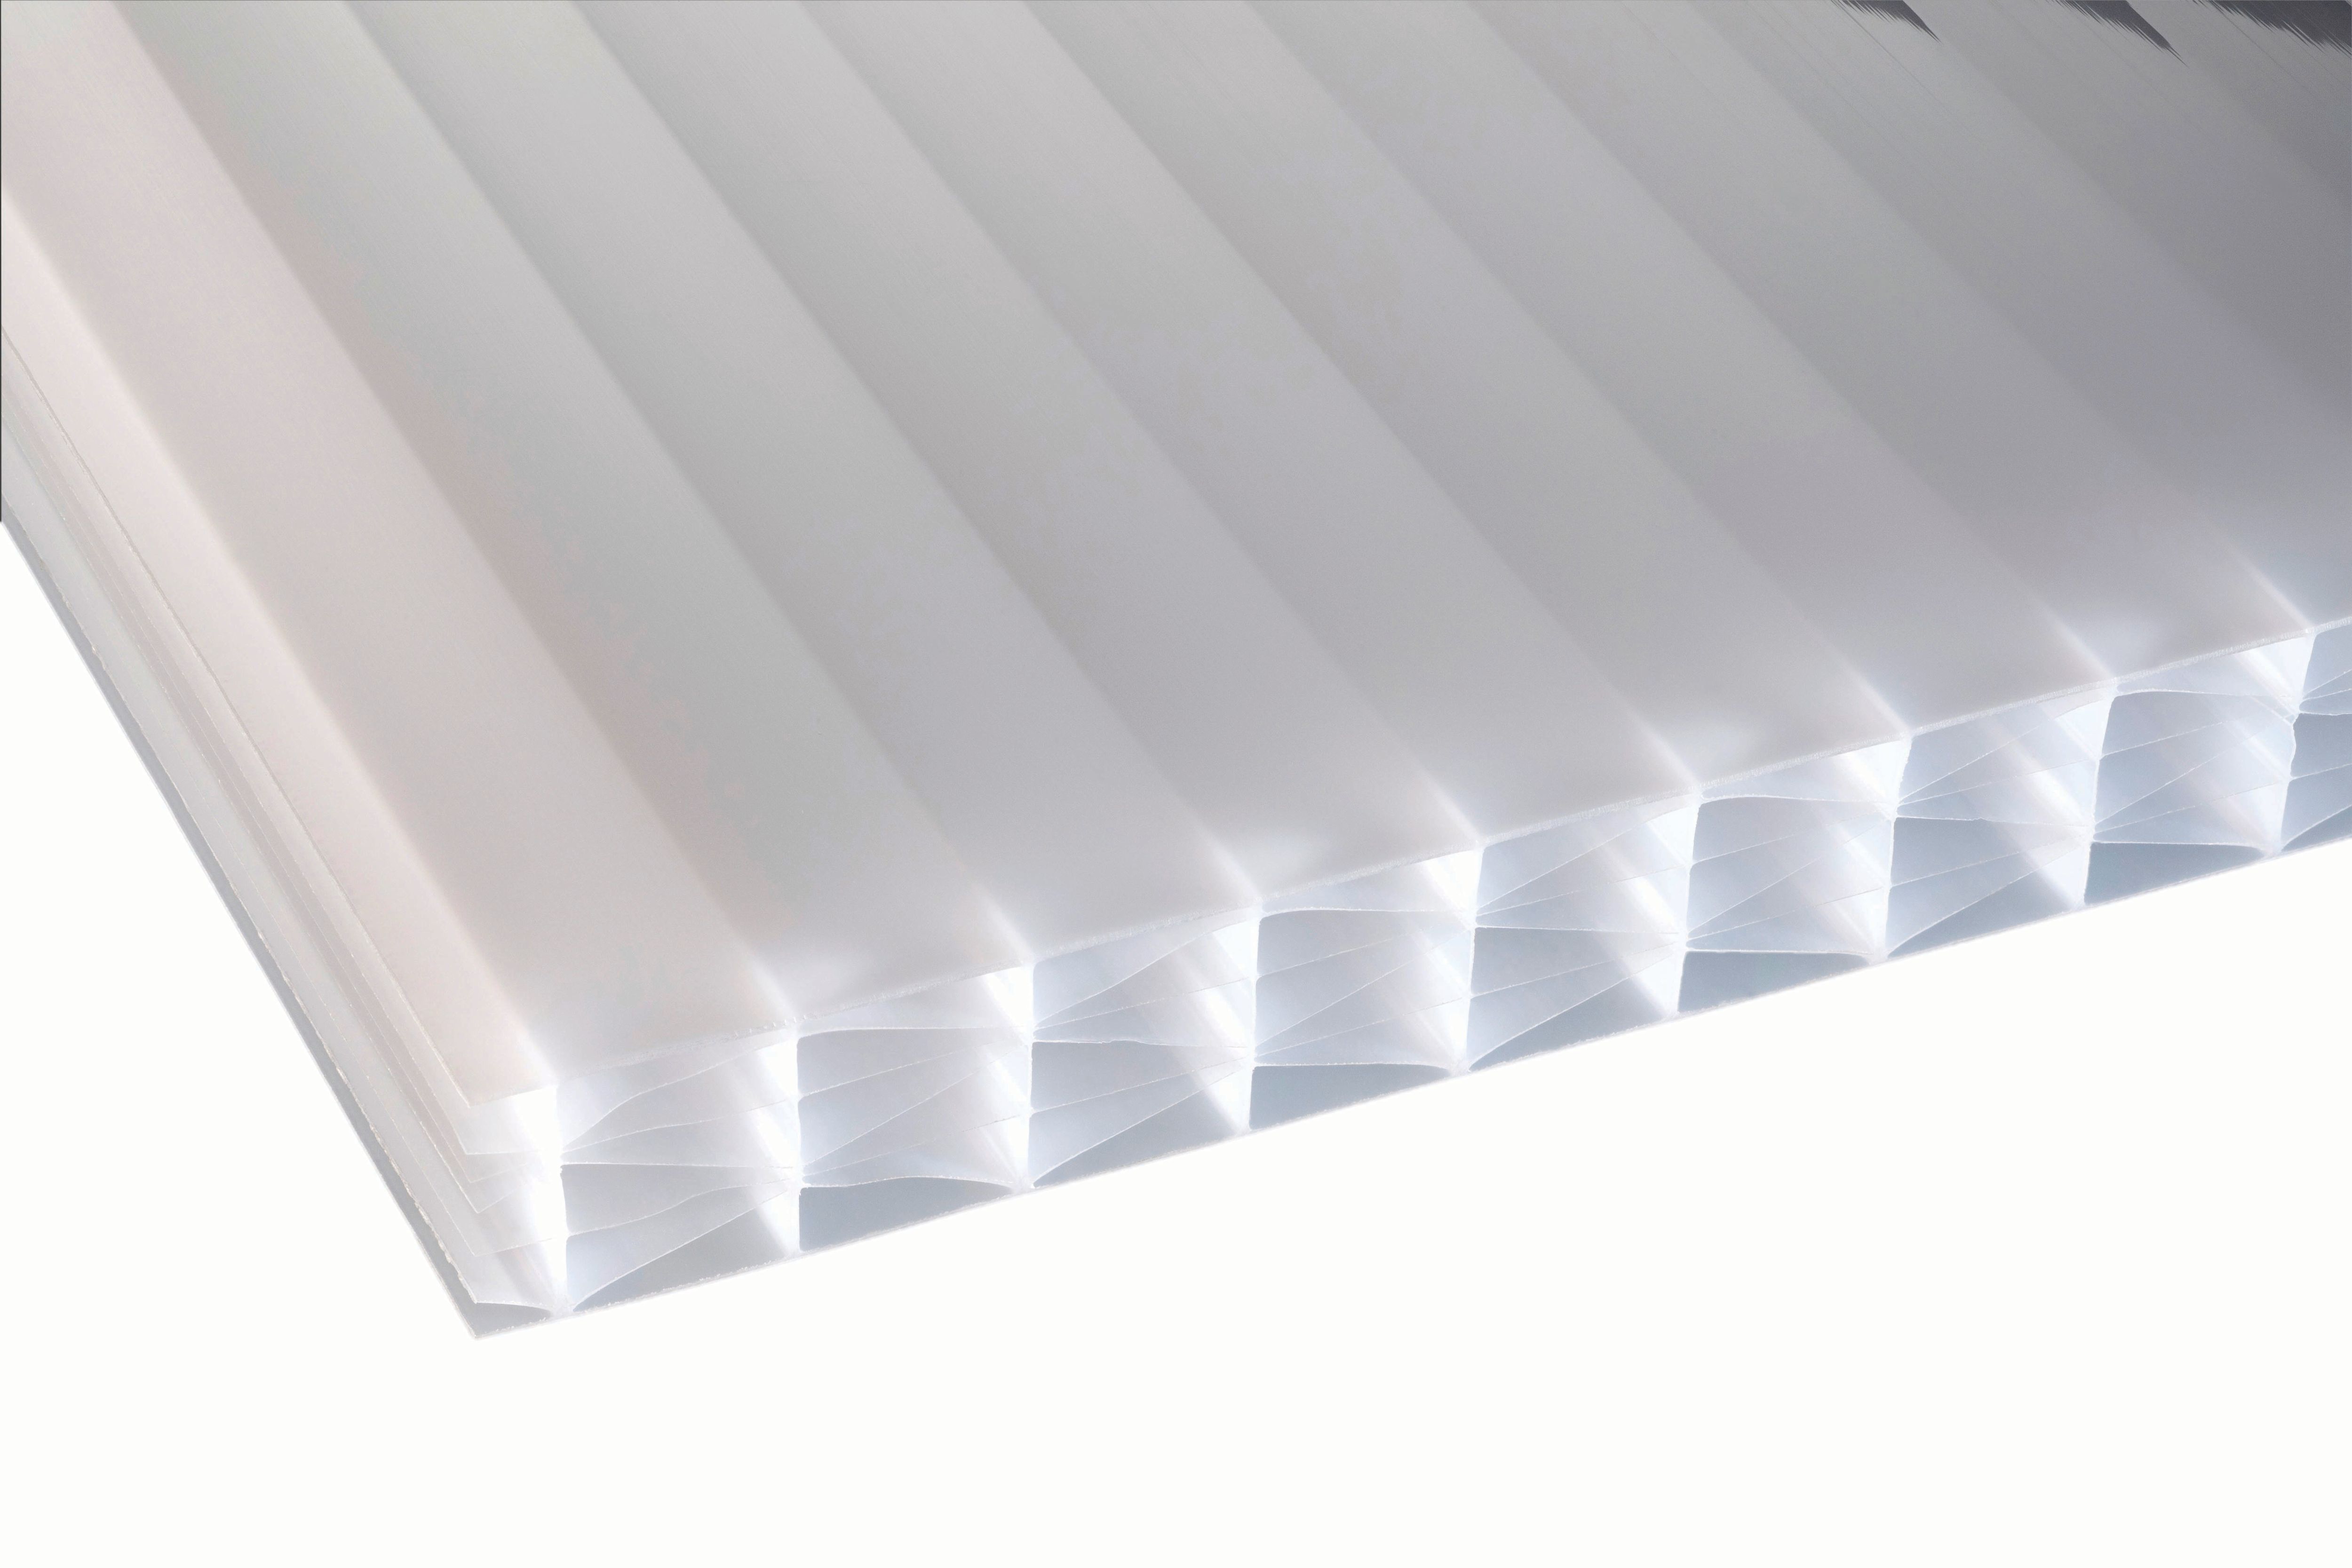 Image of 25mm Opal Multiwall Polycarbonate Sheet - 3000 x 700mm